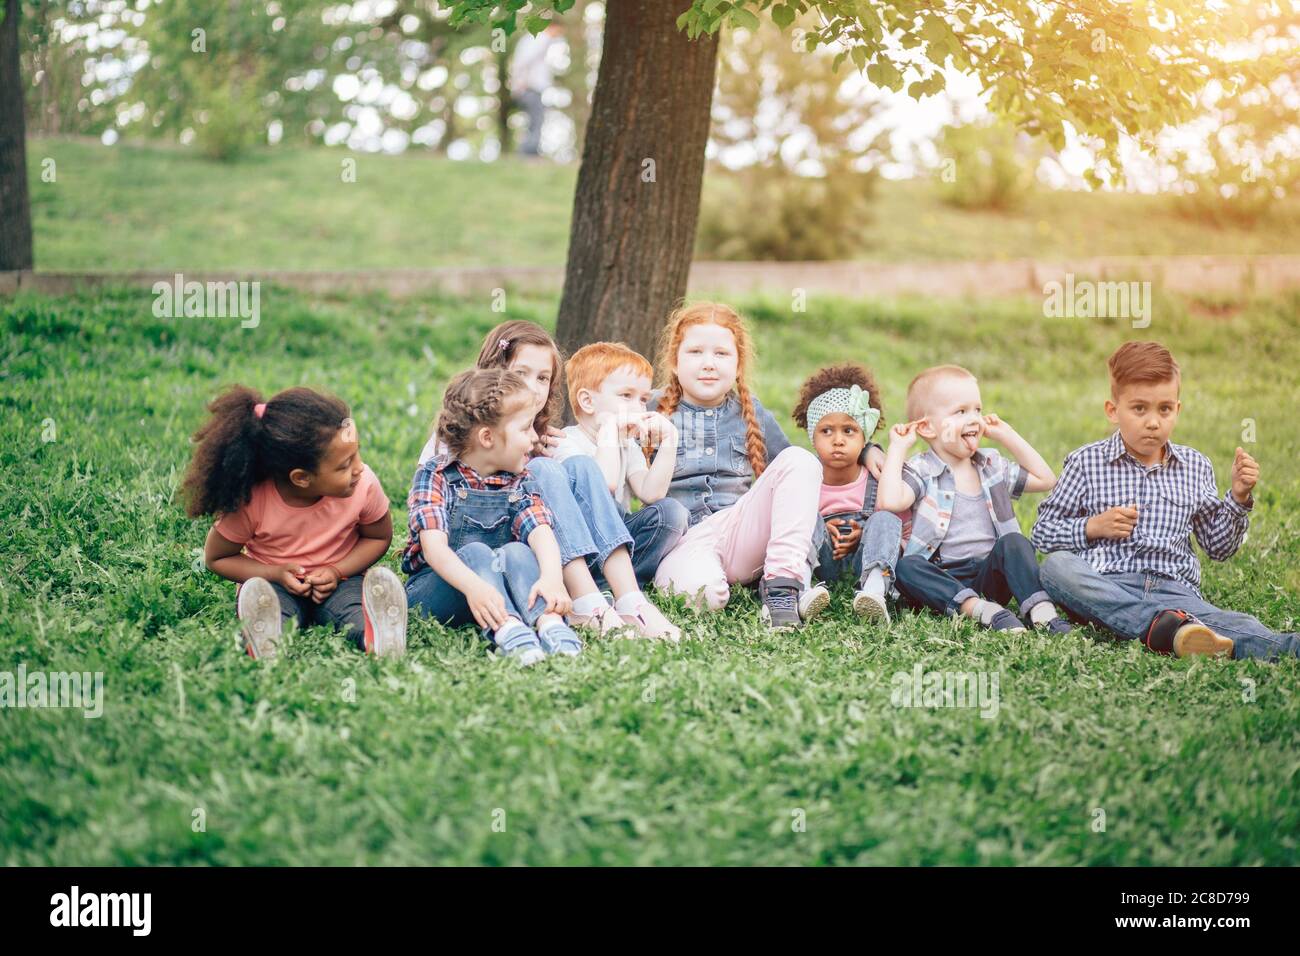 children sitting together on grass in park. concept of childhood, friendship and multicultural communication. Stock Photo